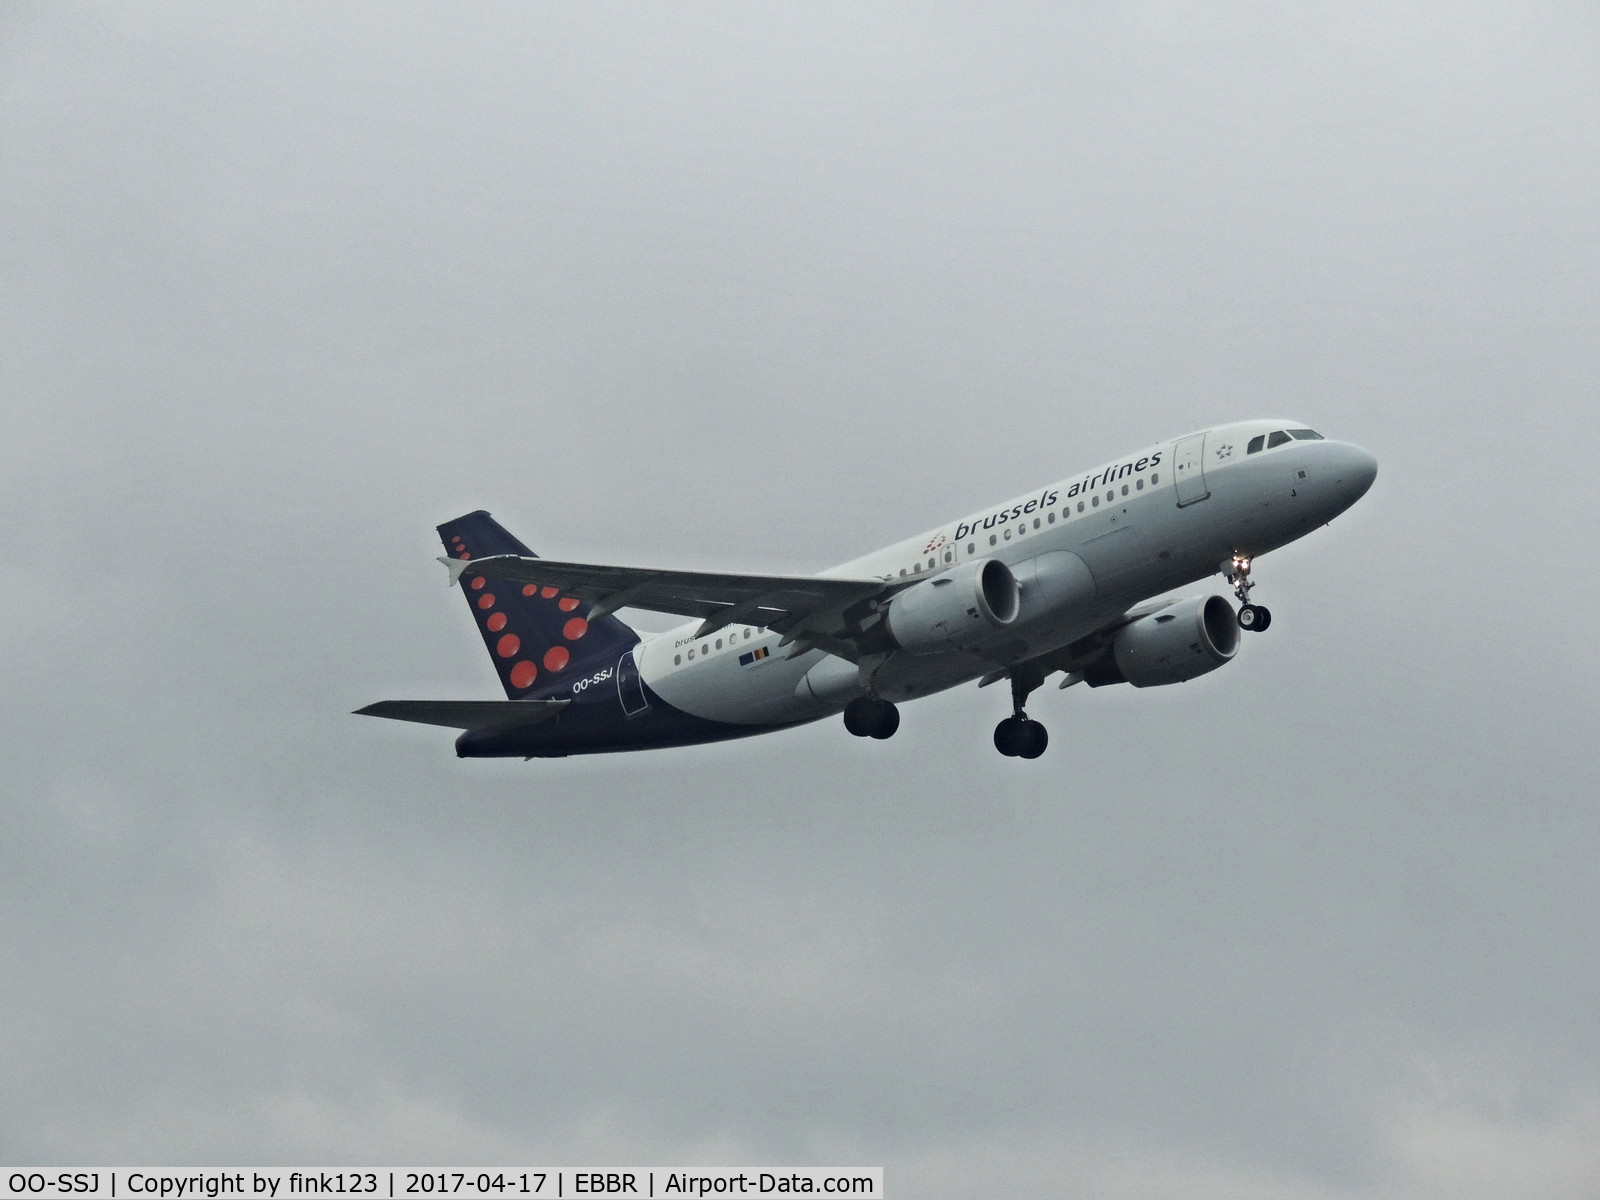 OO-SSJ, 2002 Airbus A319-111 C/N 1759, brussel airlines after departure